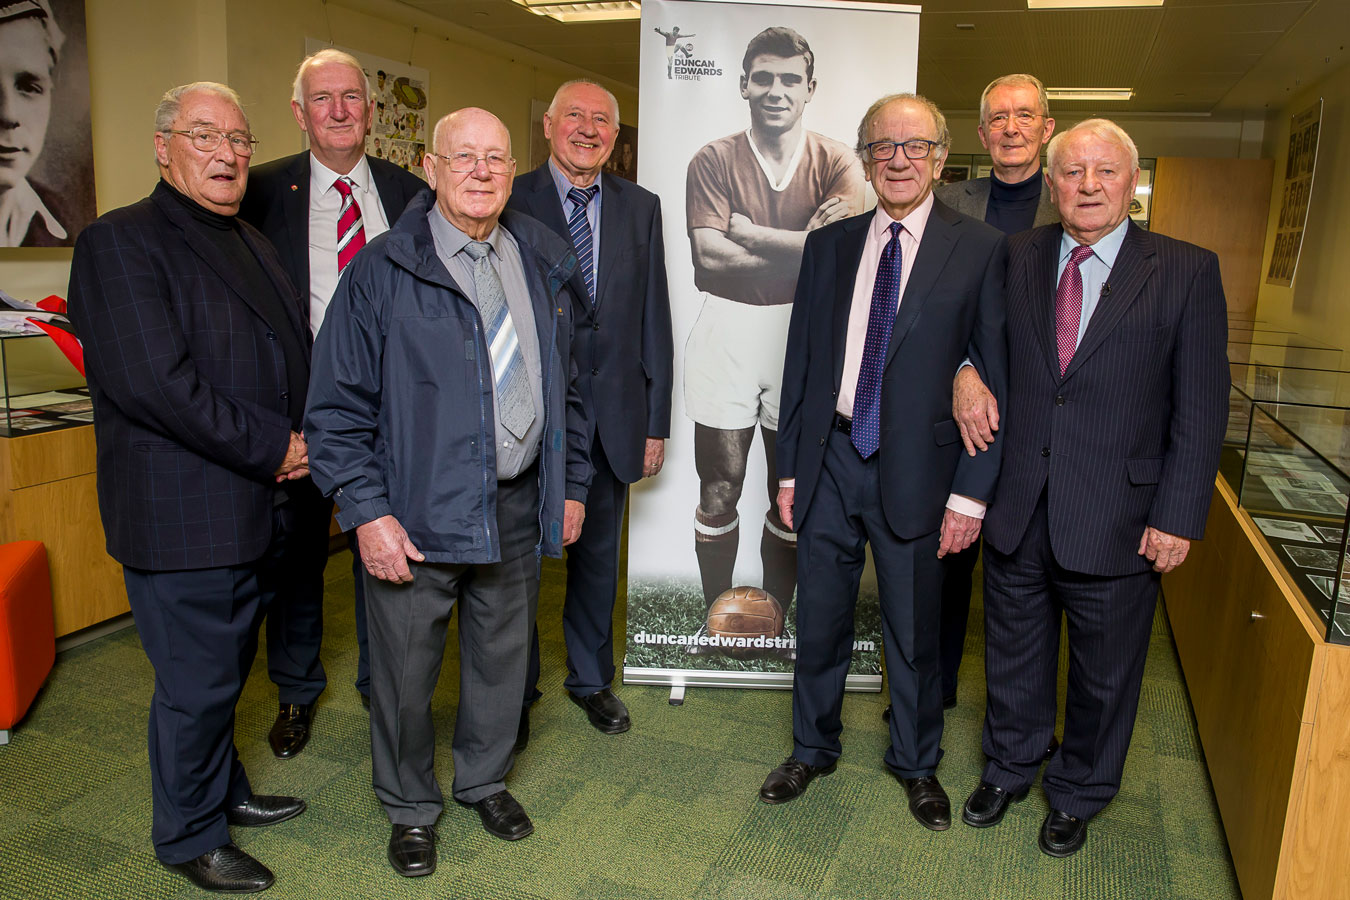 THE DOC - A WONDERFUL NIGHT OF MEMORIES FOR THE  GREATEST PLAYER OF THEM ALL – DUNCAN EDWARDS